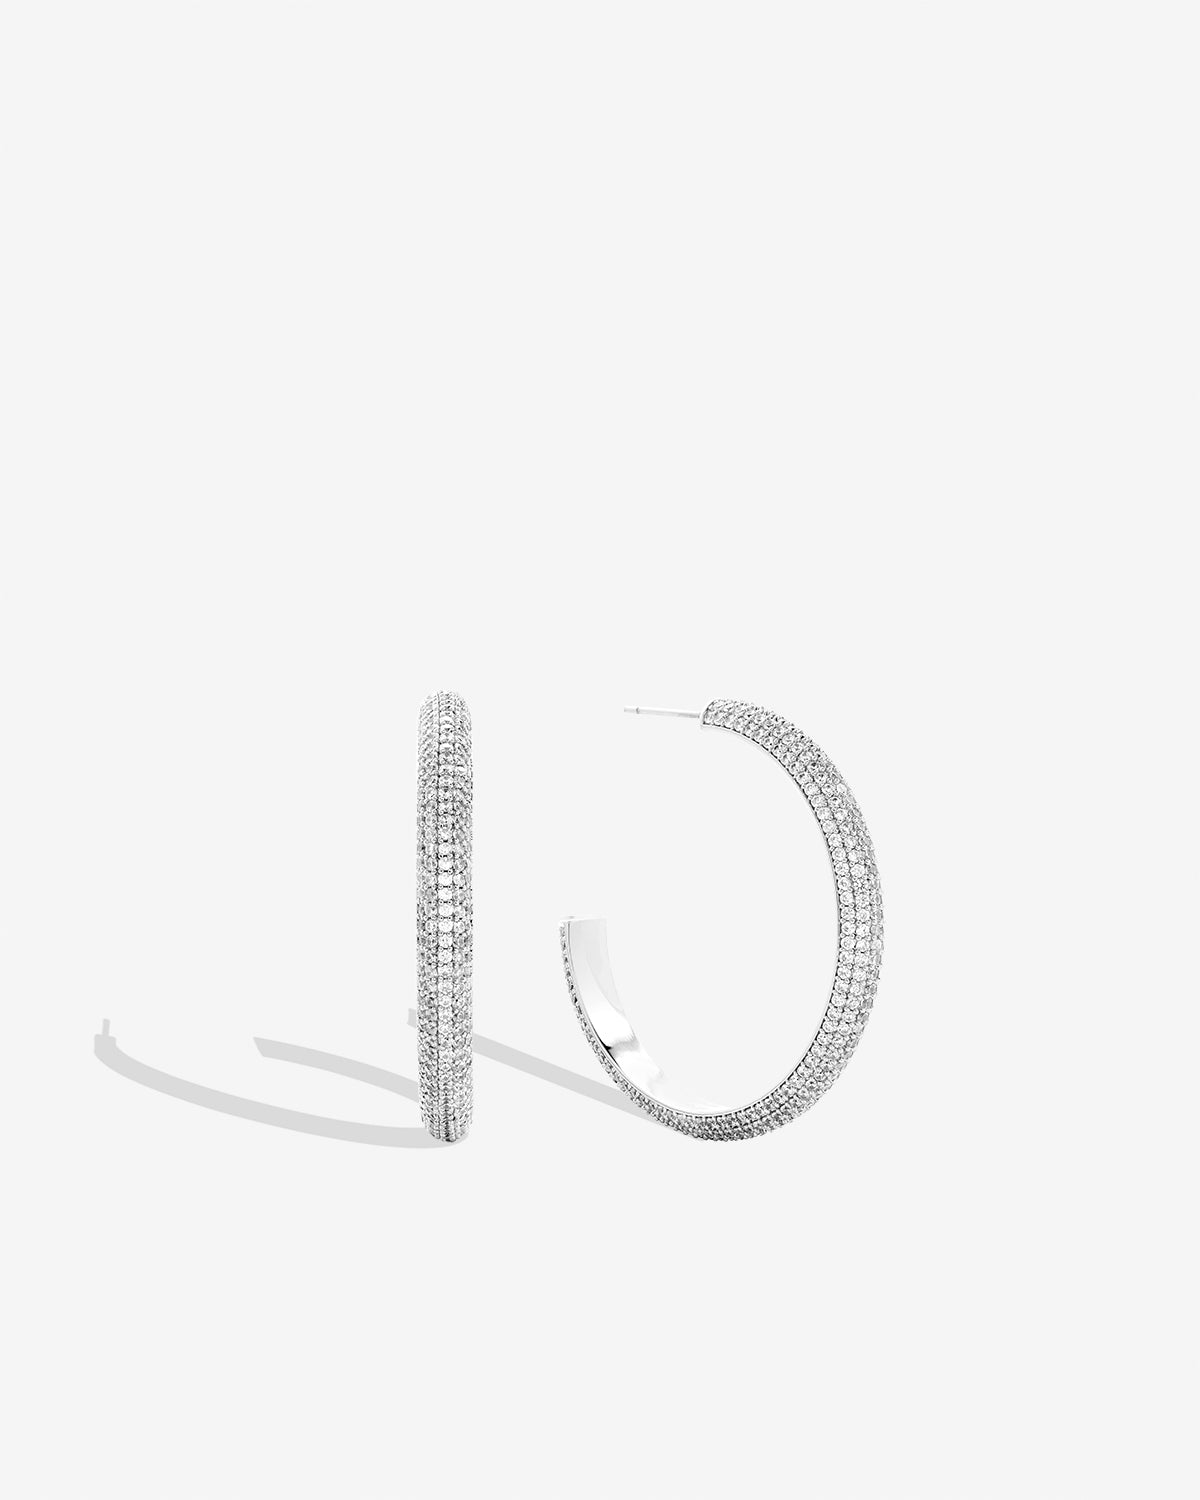 Bryan Anthonys Layers of You Collection Unstoppable Maxi Hoop Earrings Silver